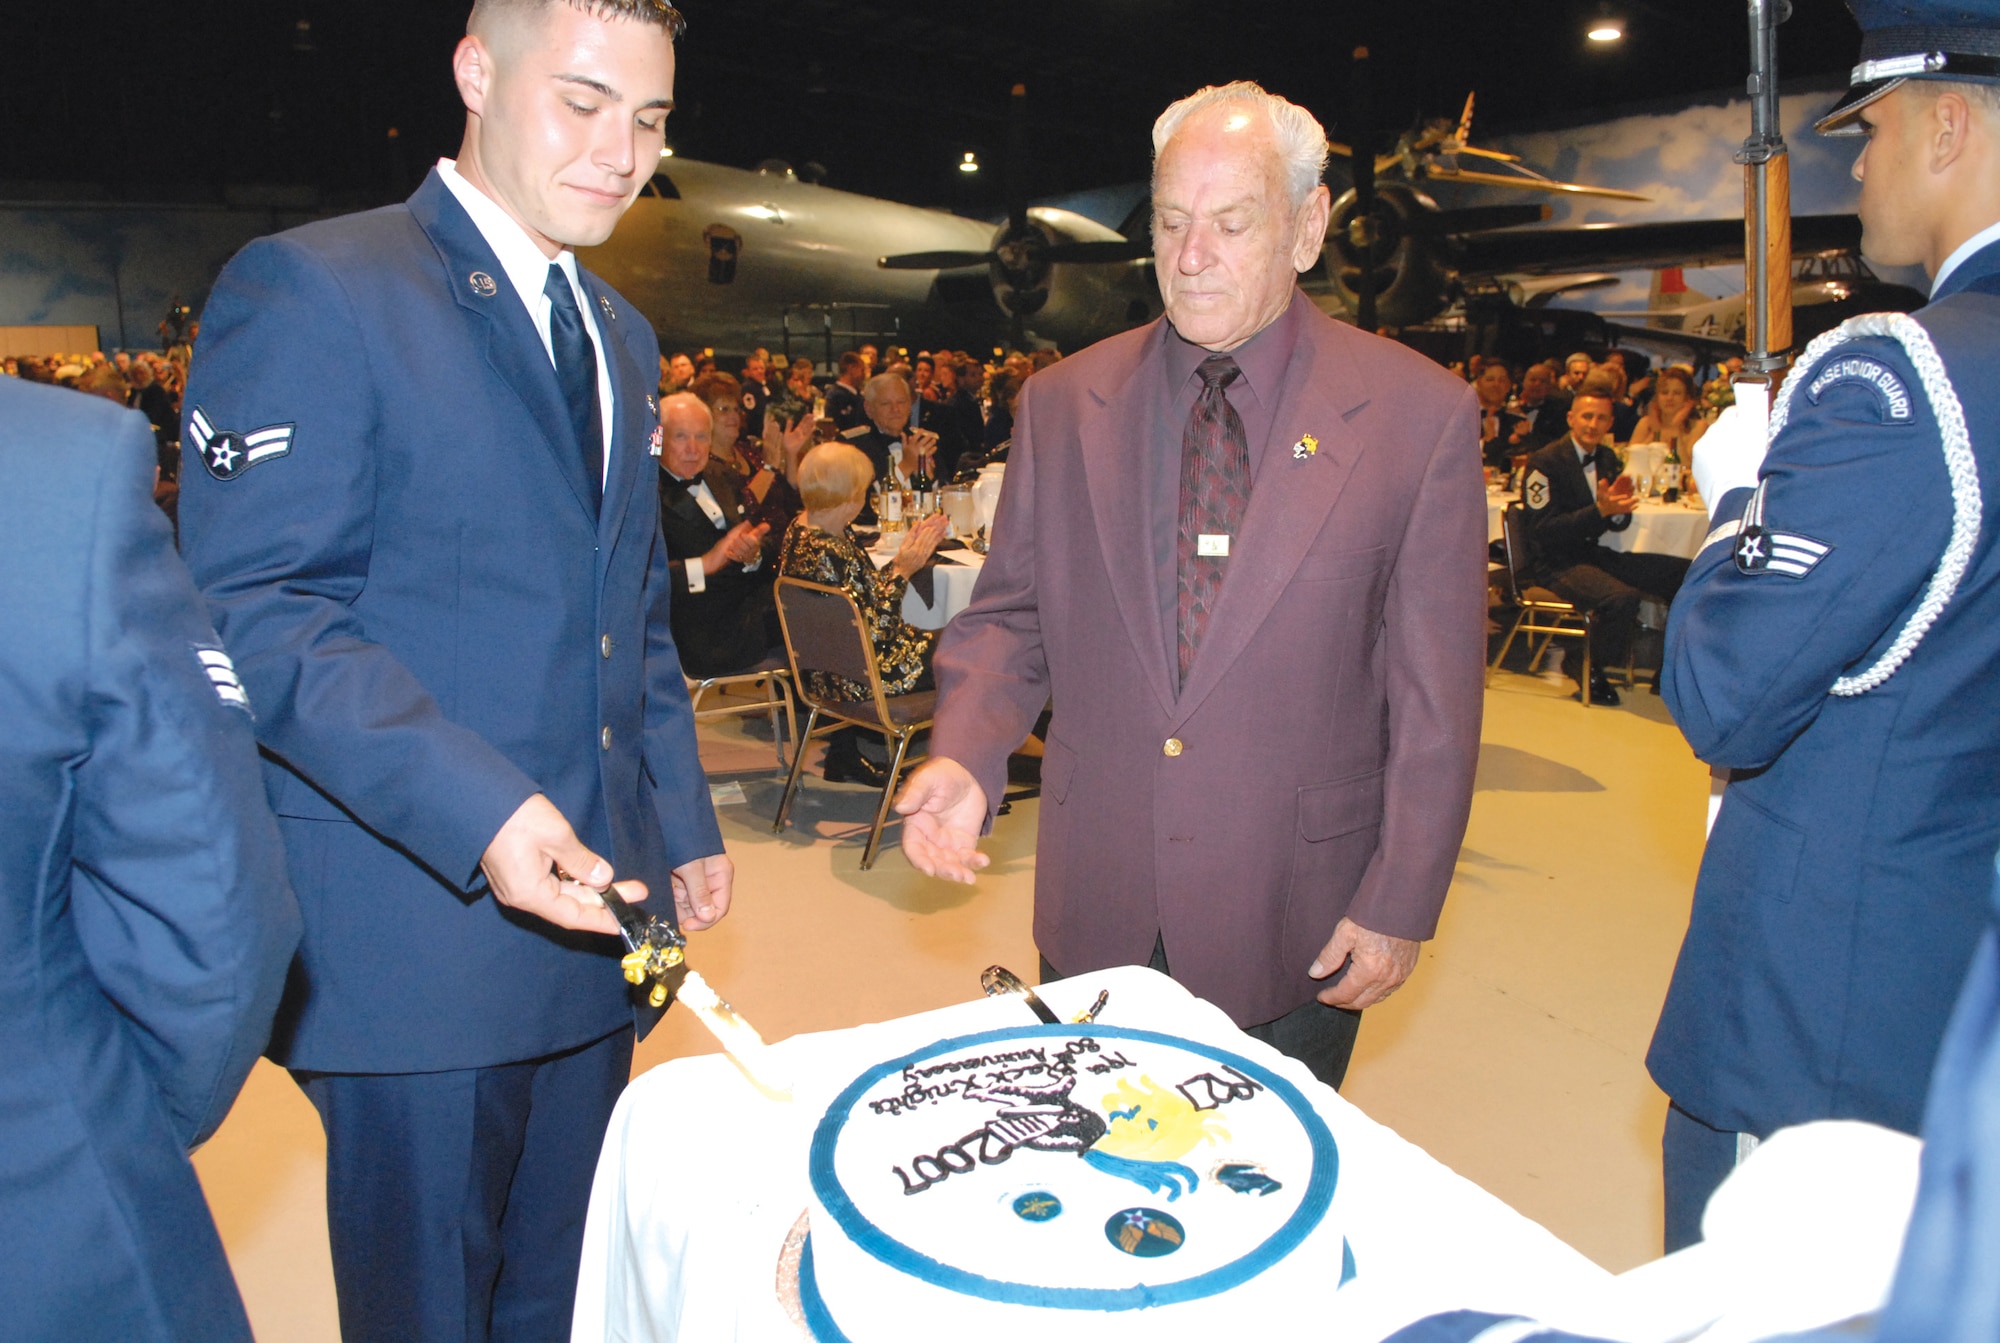 Airman First Class Josh Wullenweber, assigned to the 19th ARG April 30, 2006,  and MSgt (1st Sgt Ret) Howard Genthner, enlisted in February 1949 and retired in 1969, cut the 80th birthday cake at the ball Friday night as the youngest and most senior. U. S. Air Force photo by Ray Crayton